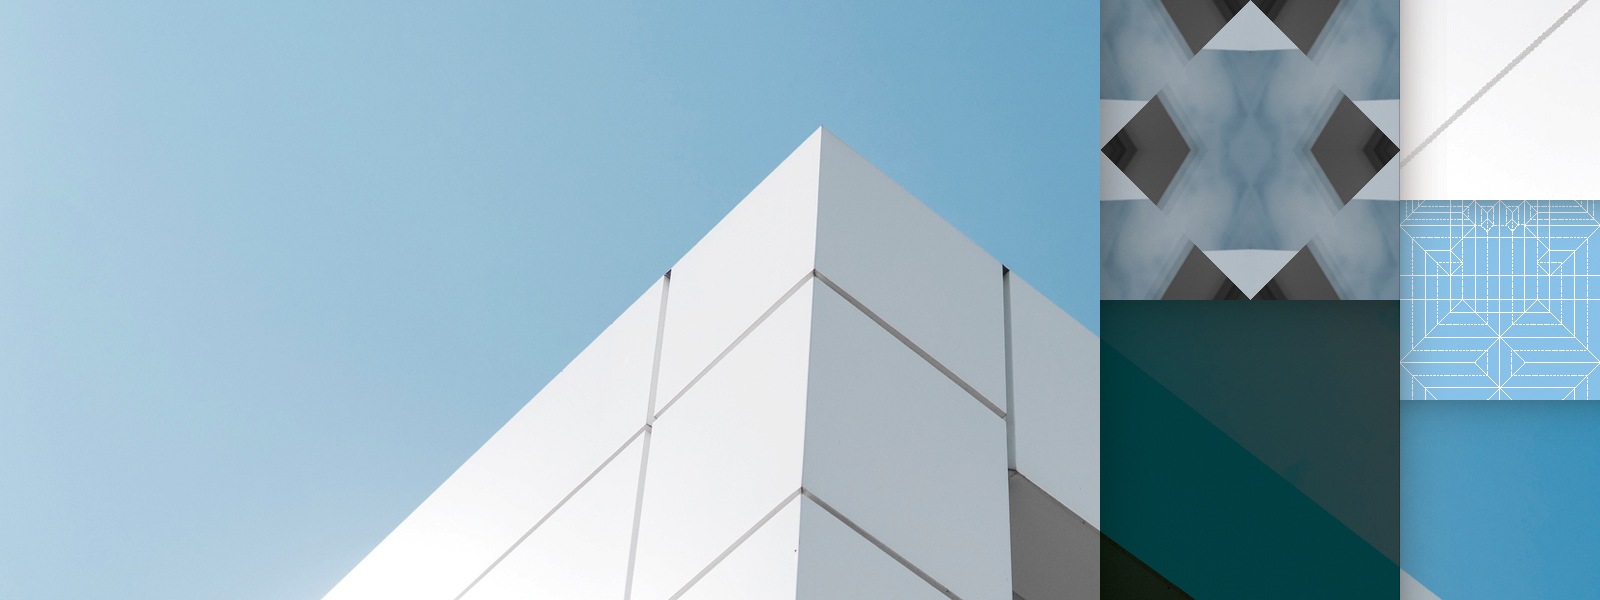 White office building against blue sky with detail boxes overlaid